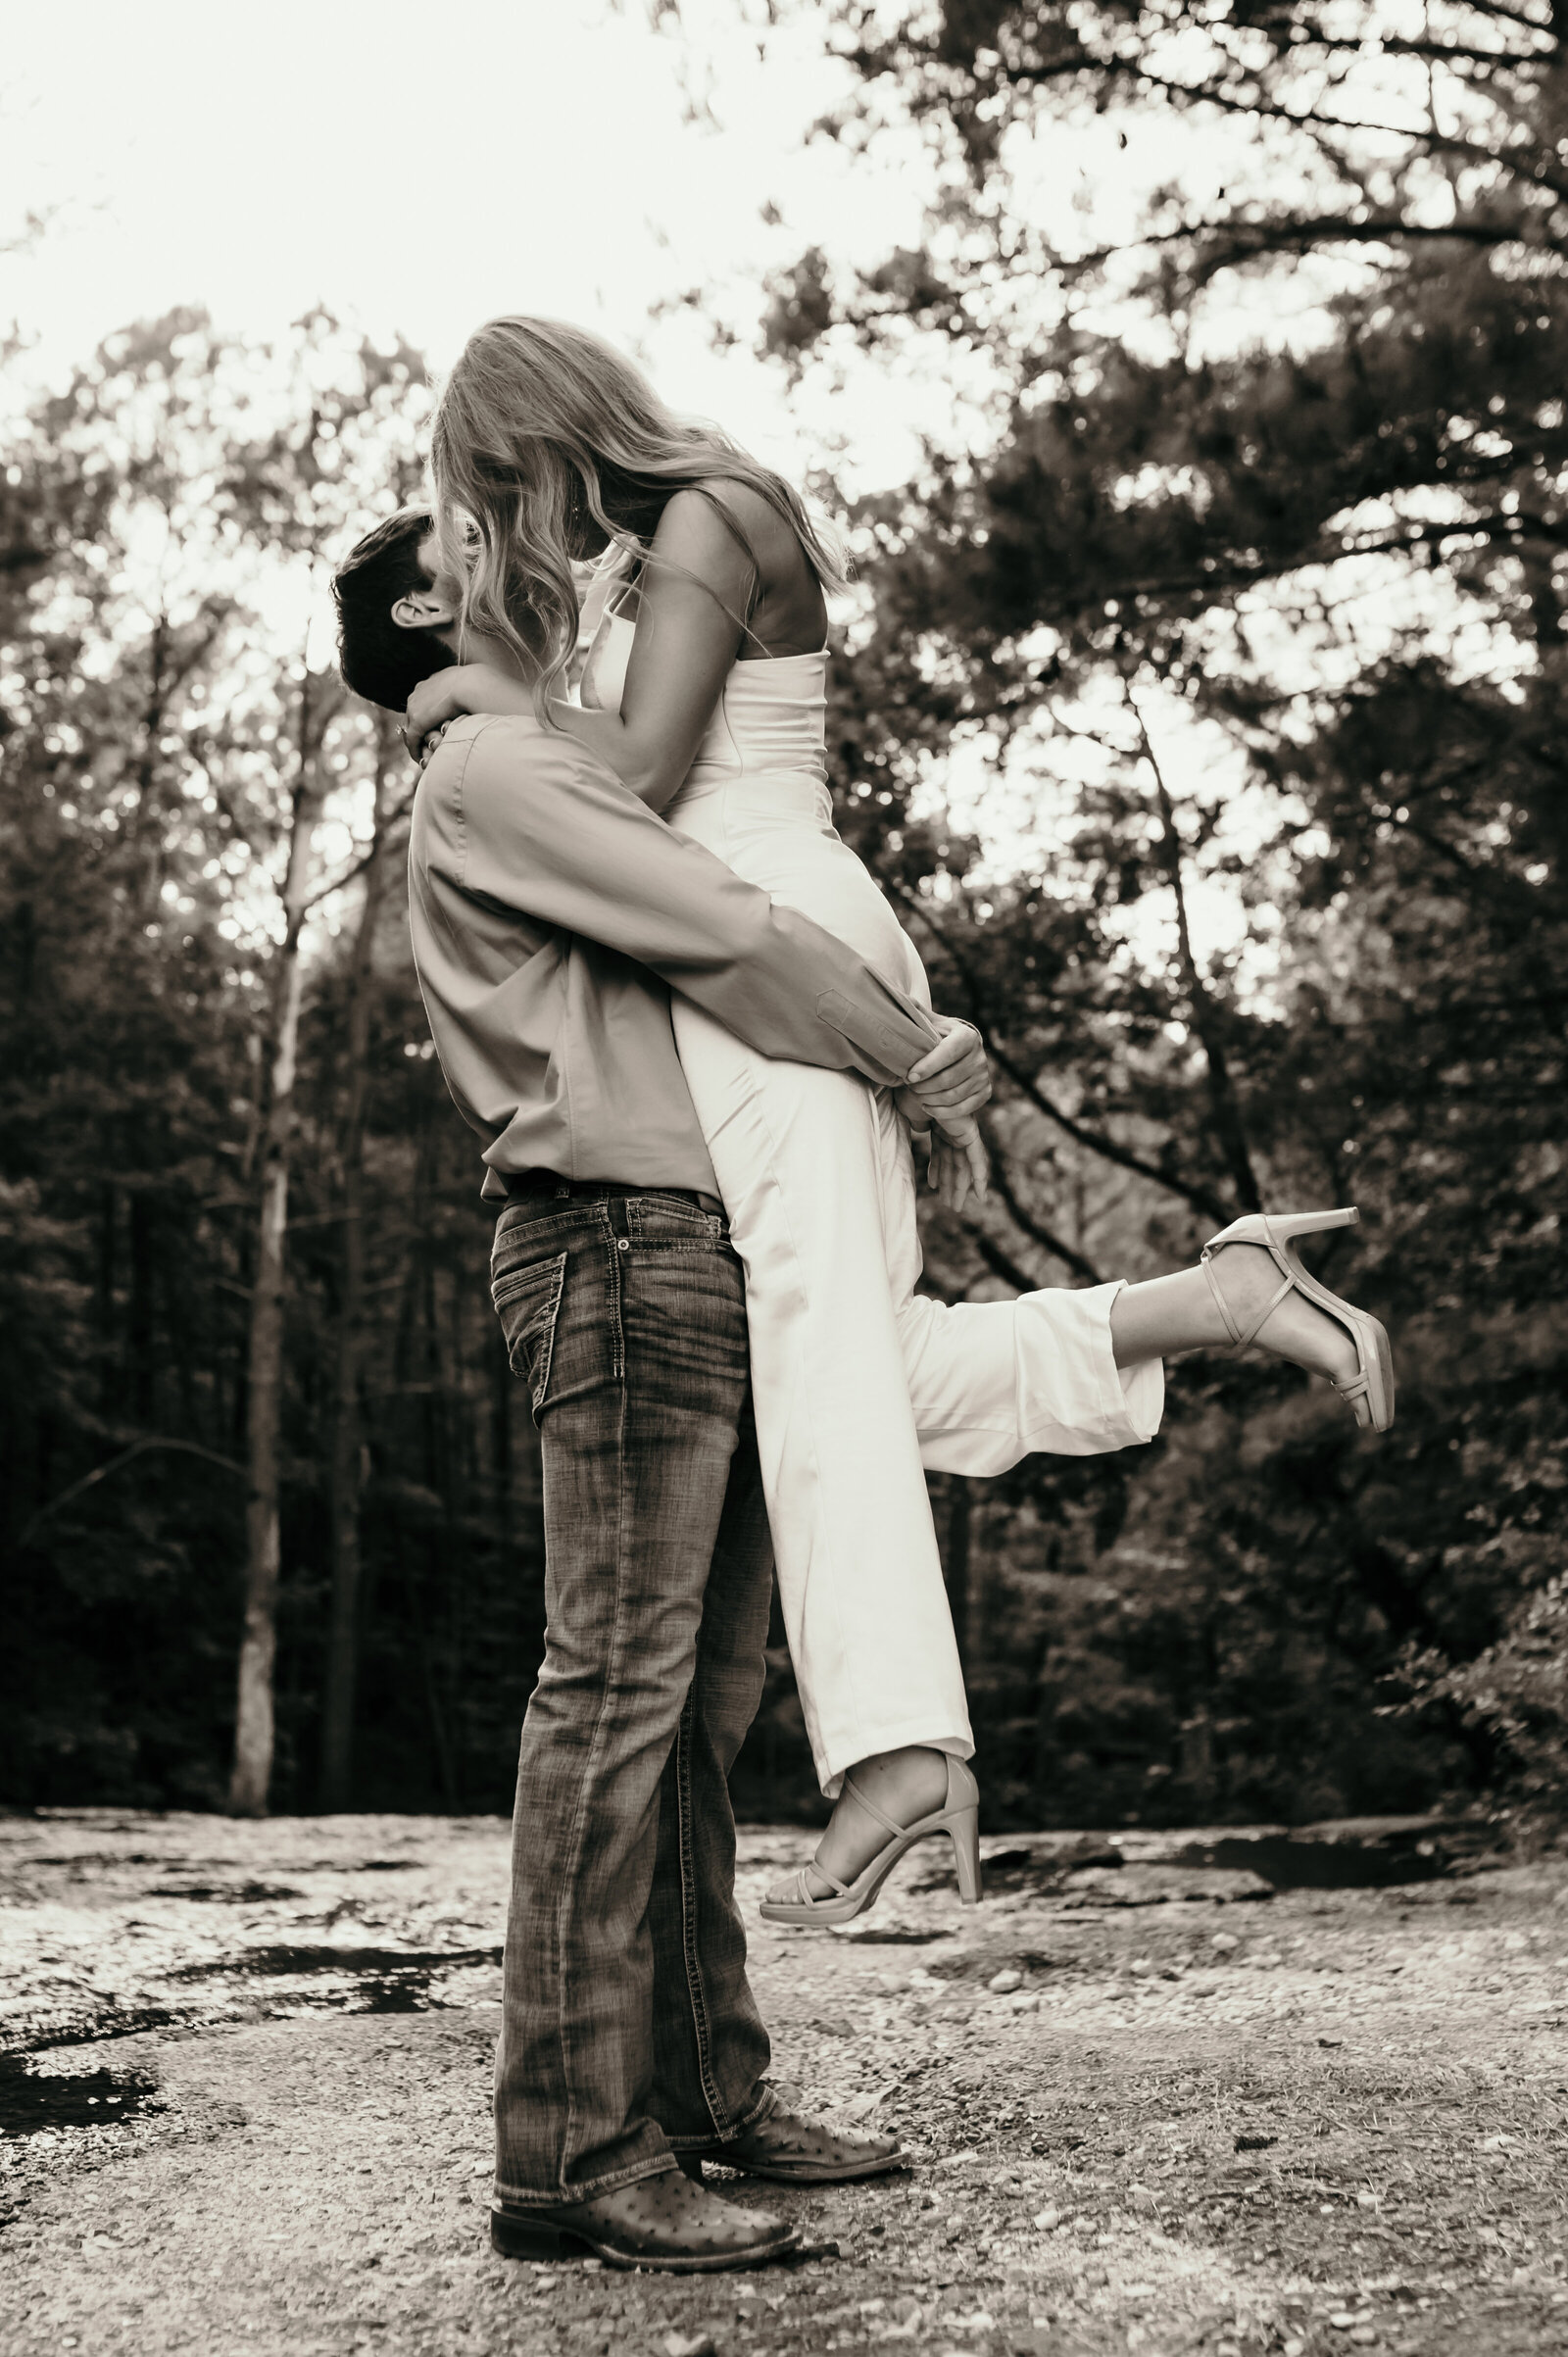 black and white outdoor engagement photos in little rock ar with man picking up his fiance as they kiss each other